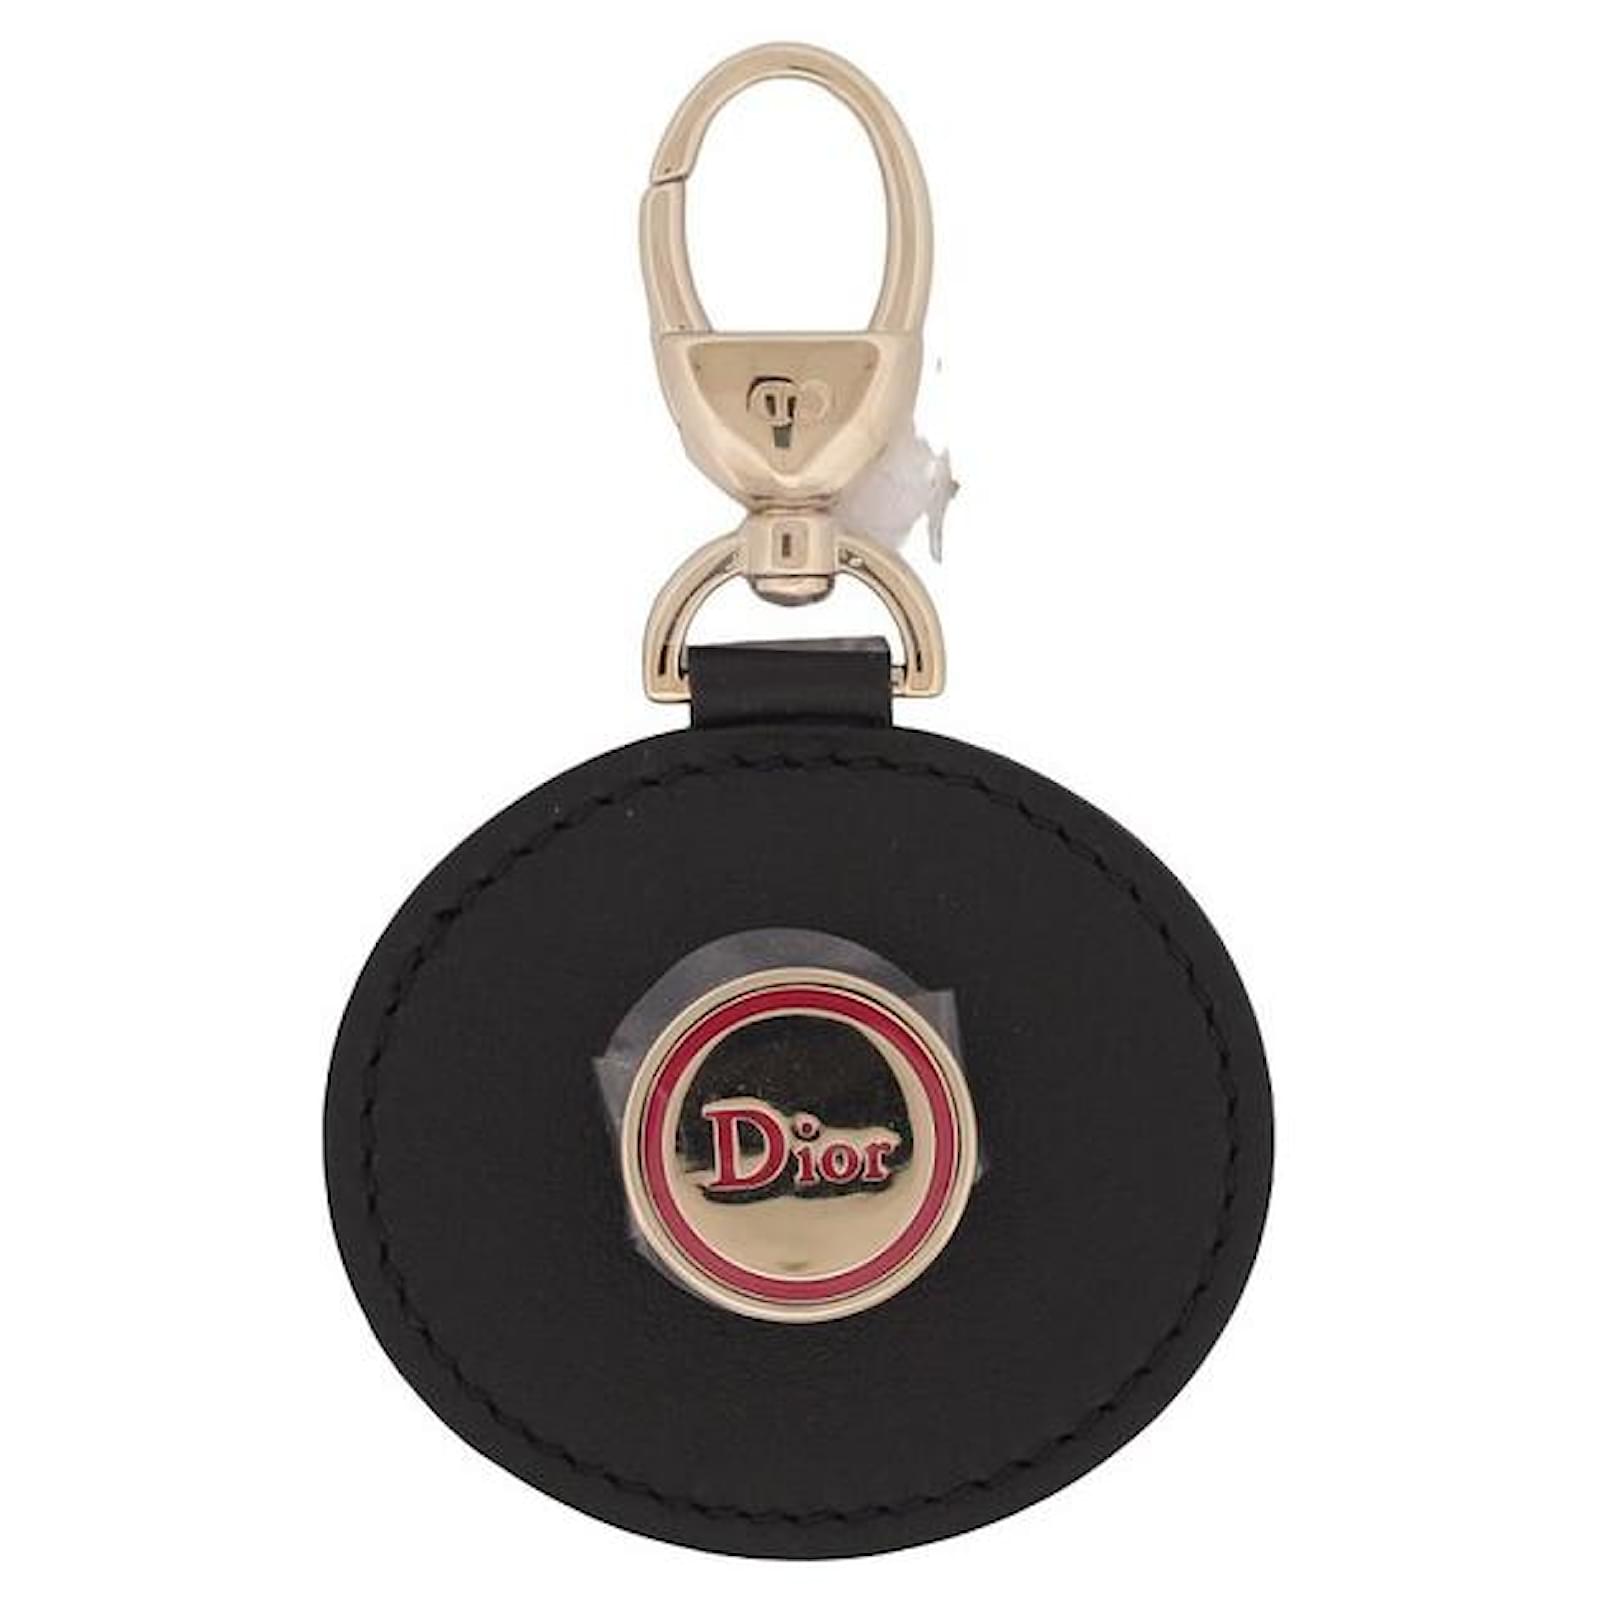 NEW CHRISTIAN DIOR ROUND LOGO S KEYRING1093OSIP LEATHER LEATHER